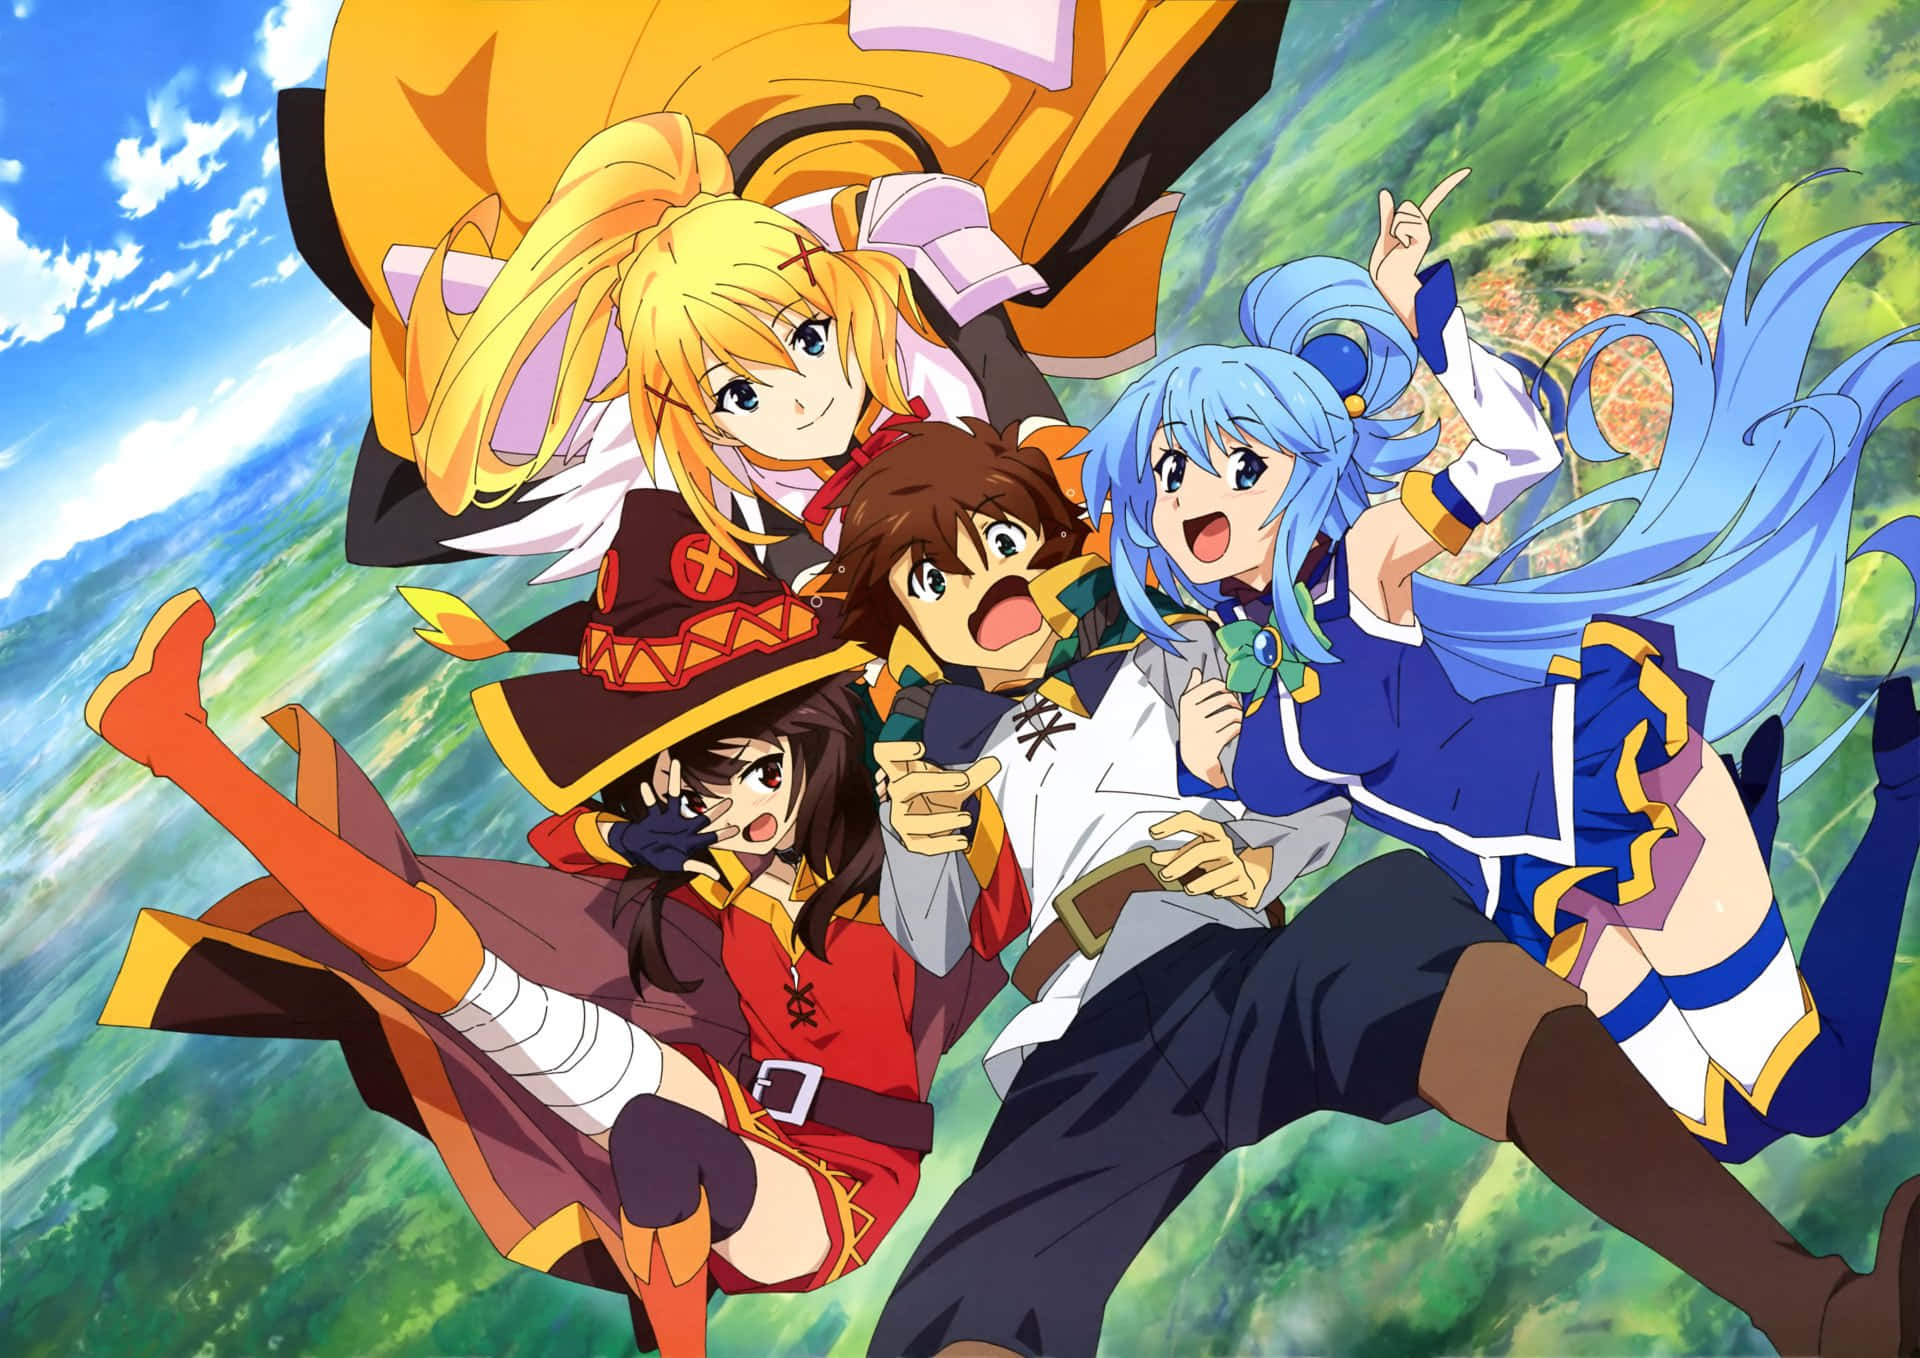 Guided by Aqua, Megumin and Darkness take on the adventure of a lifetime.